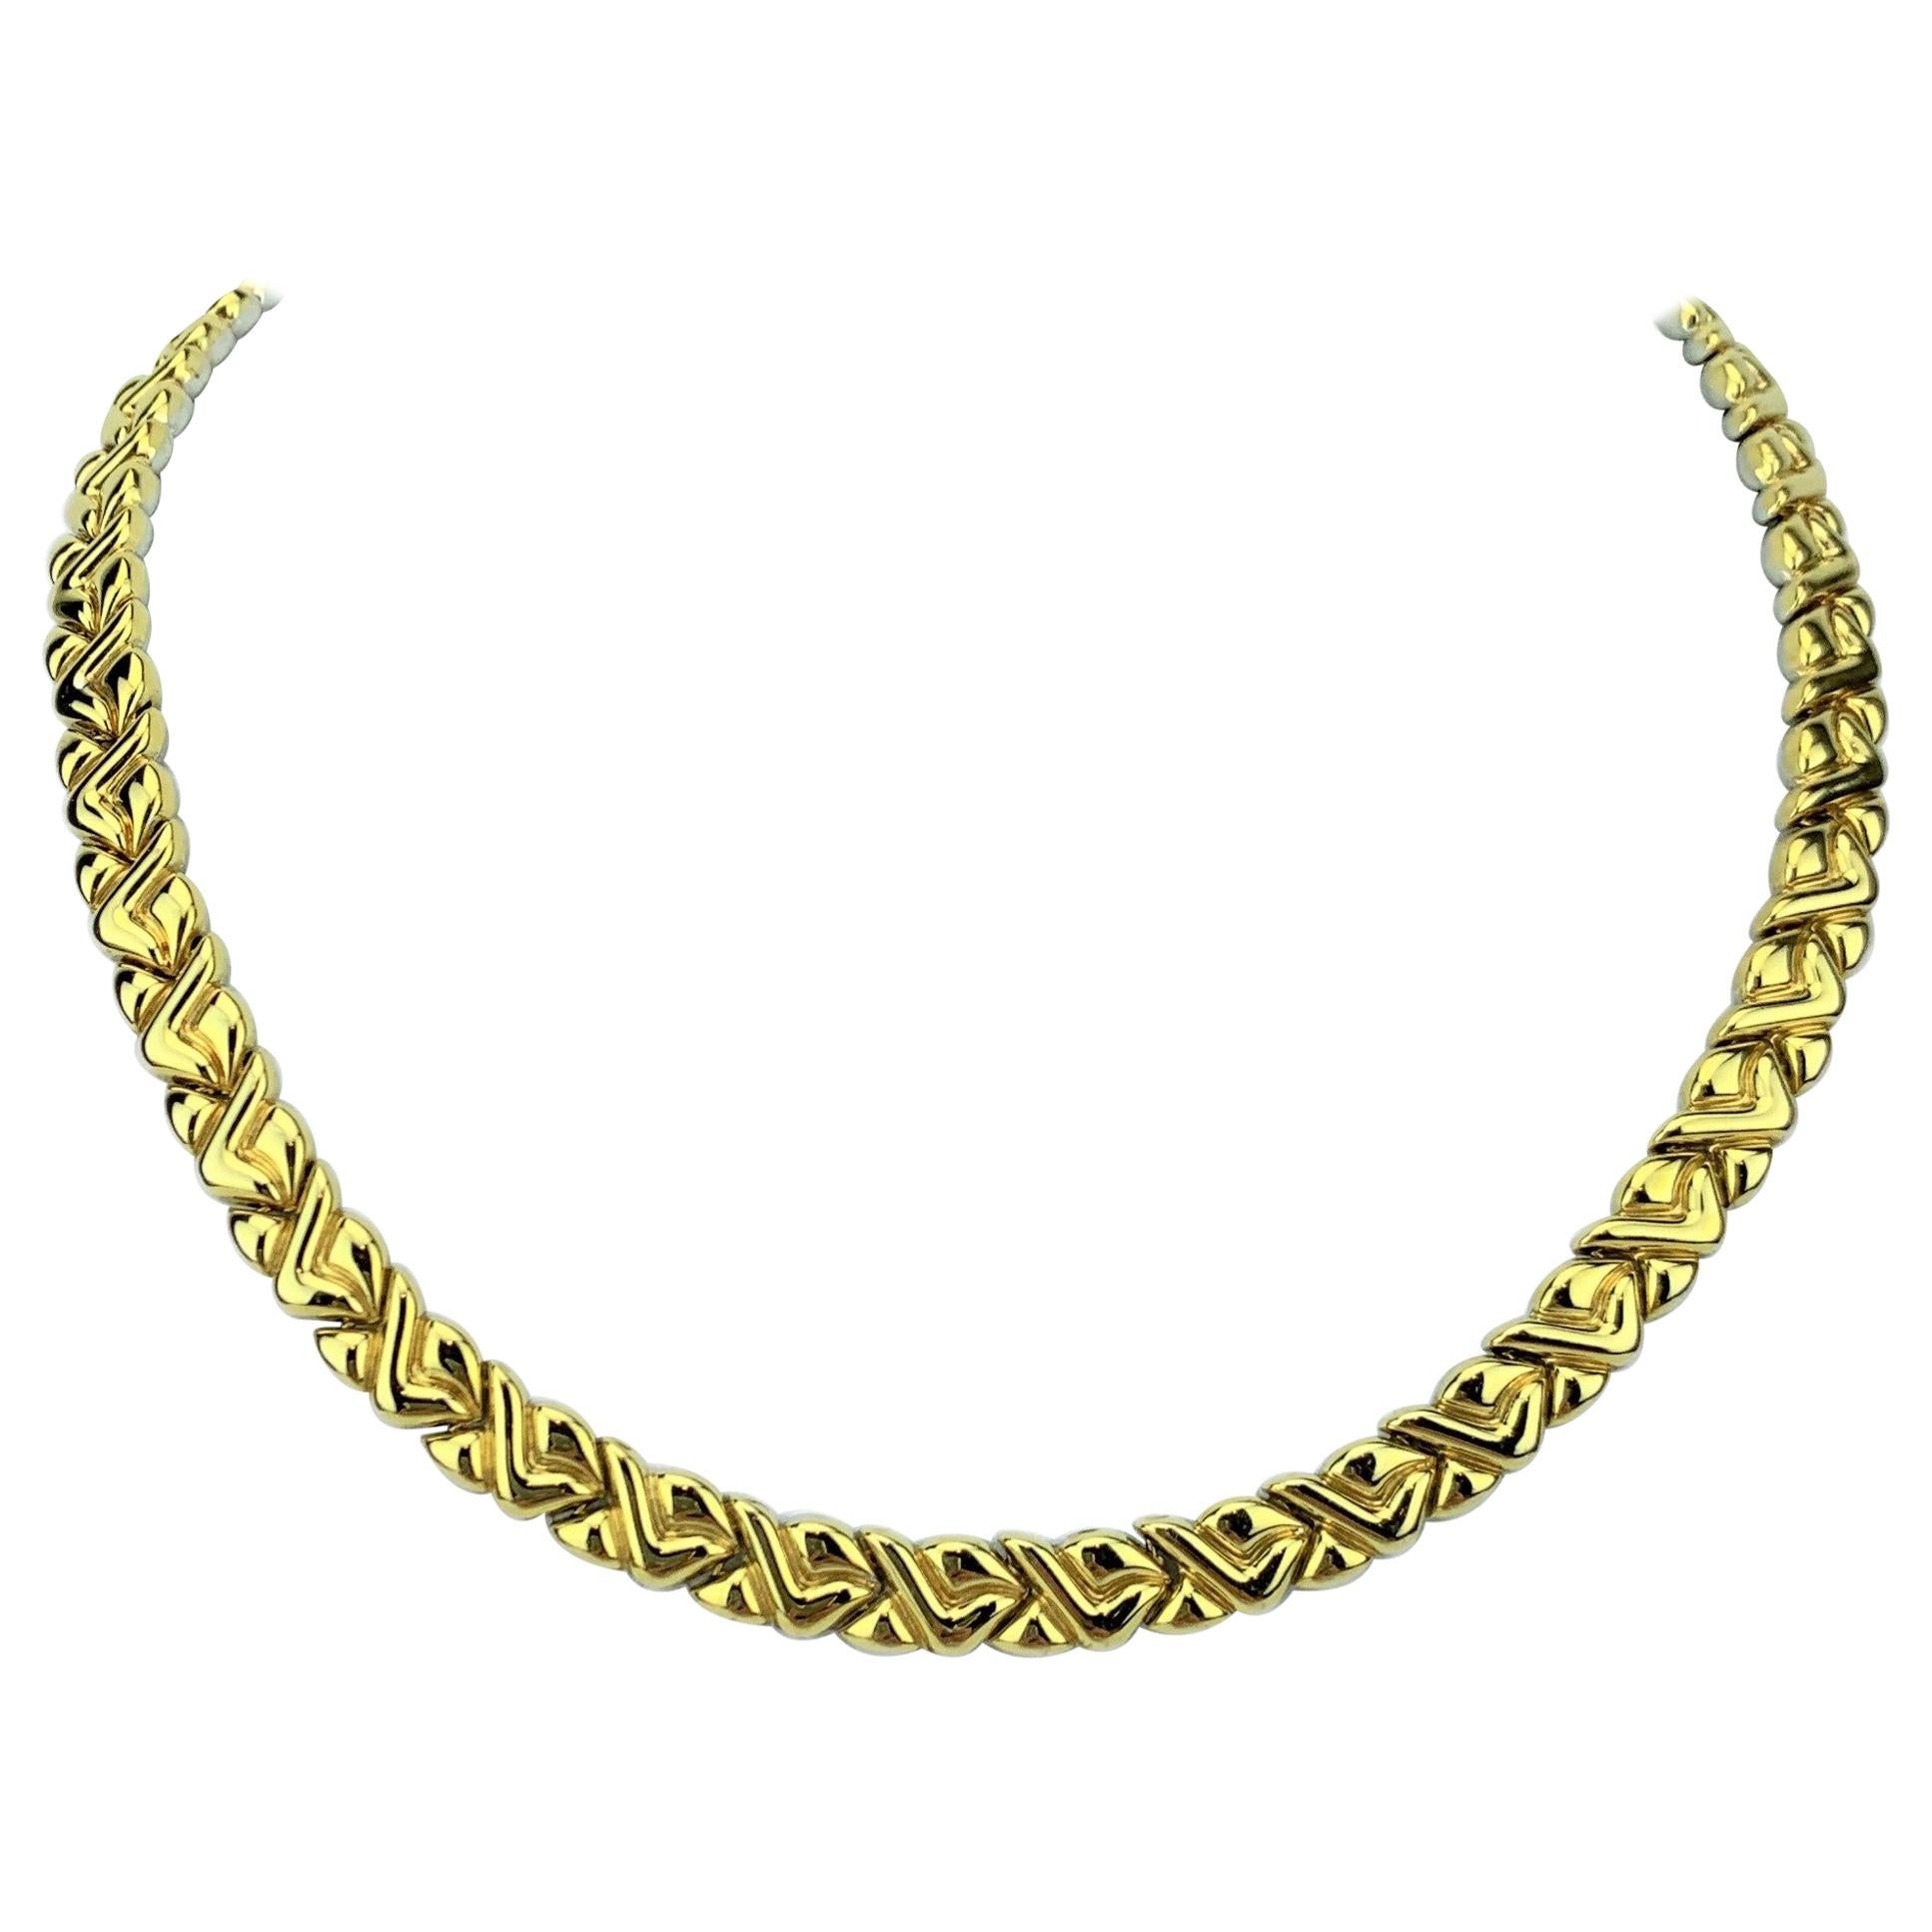 Chimento 18 Karat Yellow White Gold Reversible Ladies Fancy Link Necklace